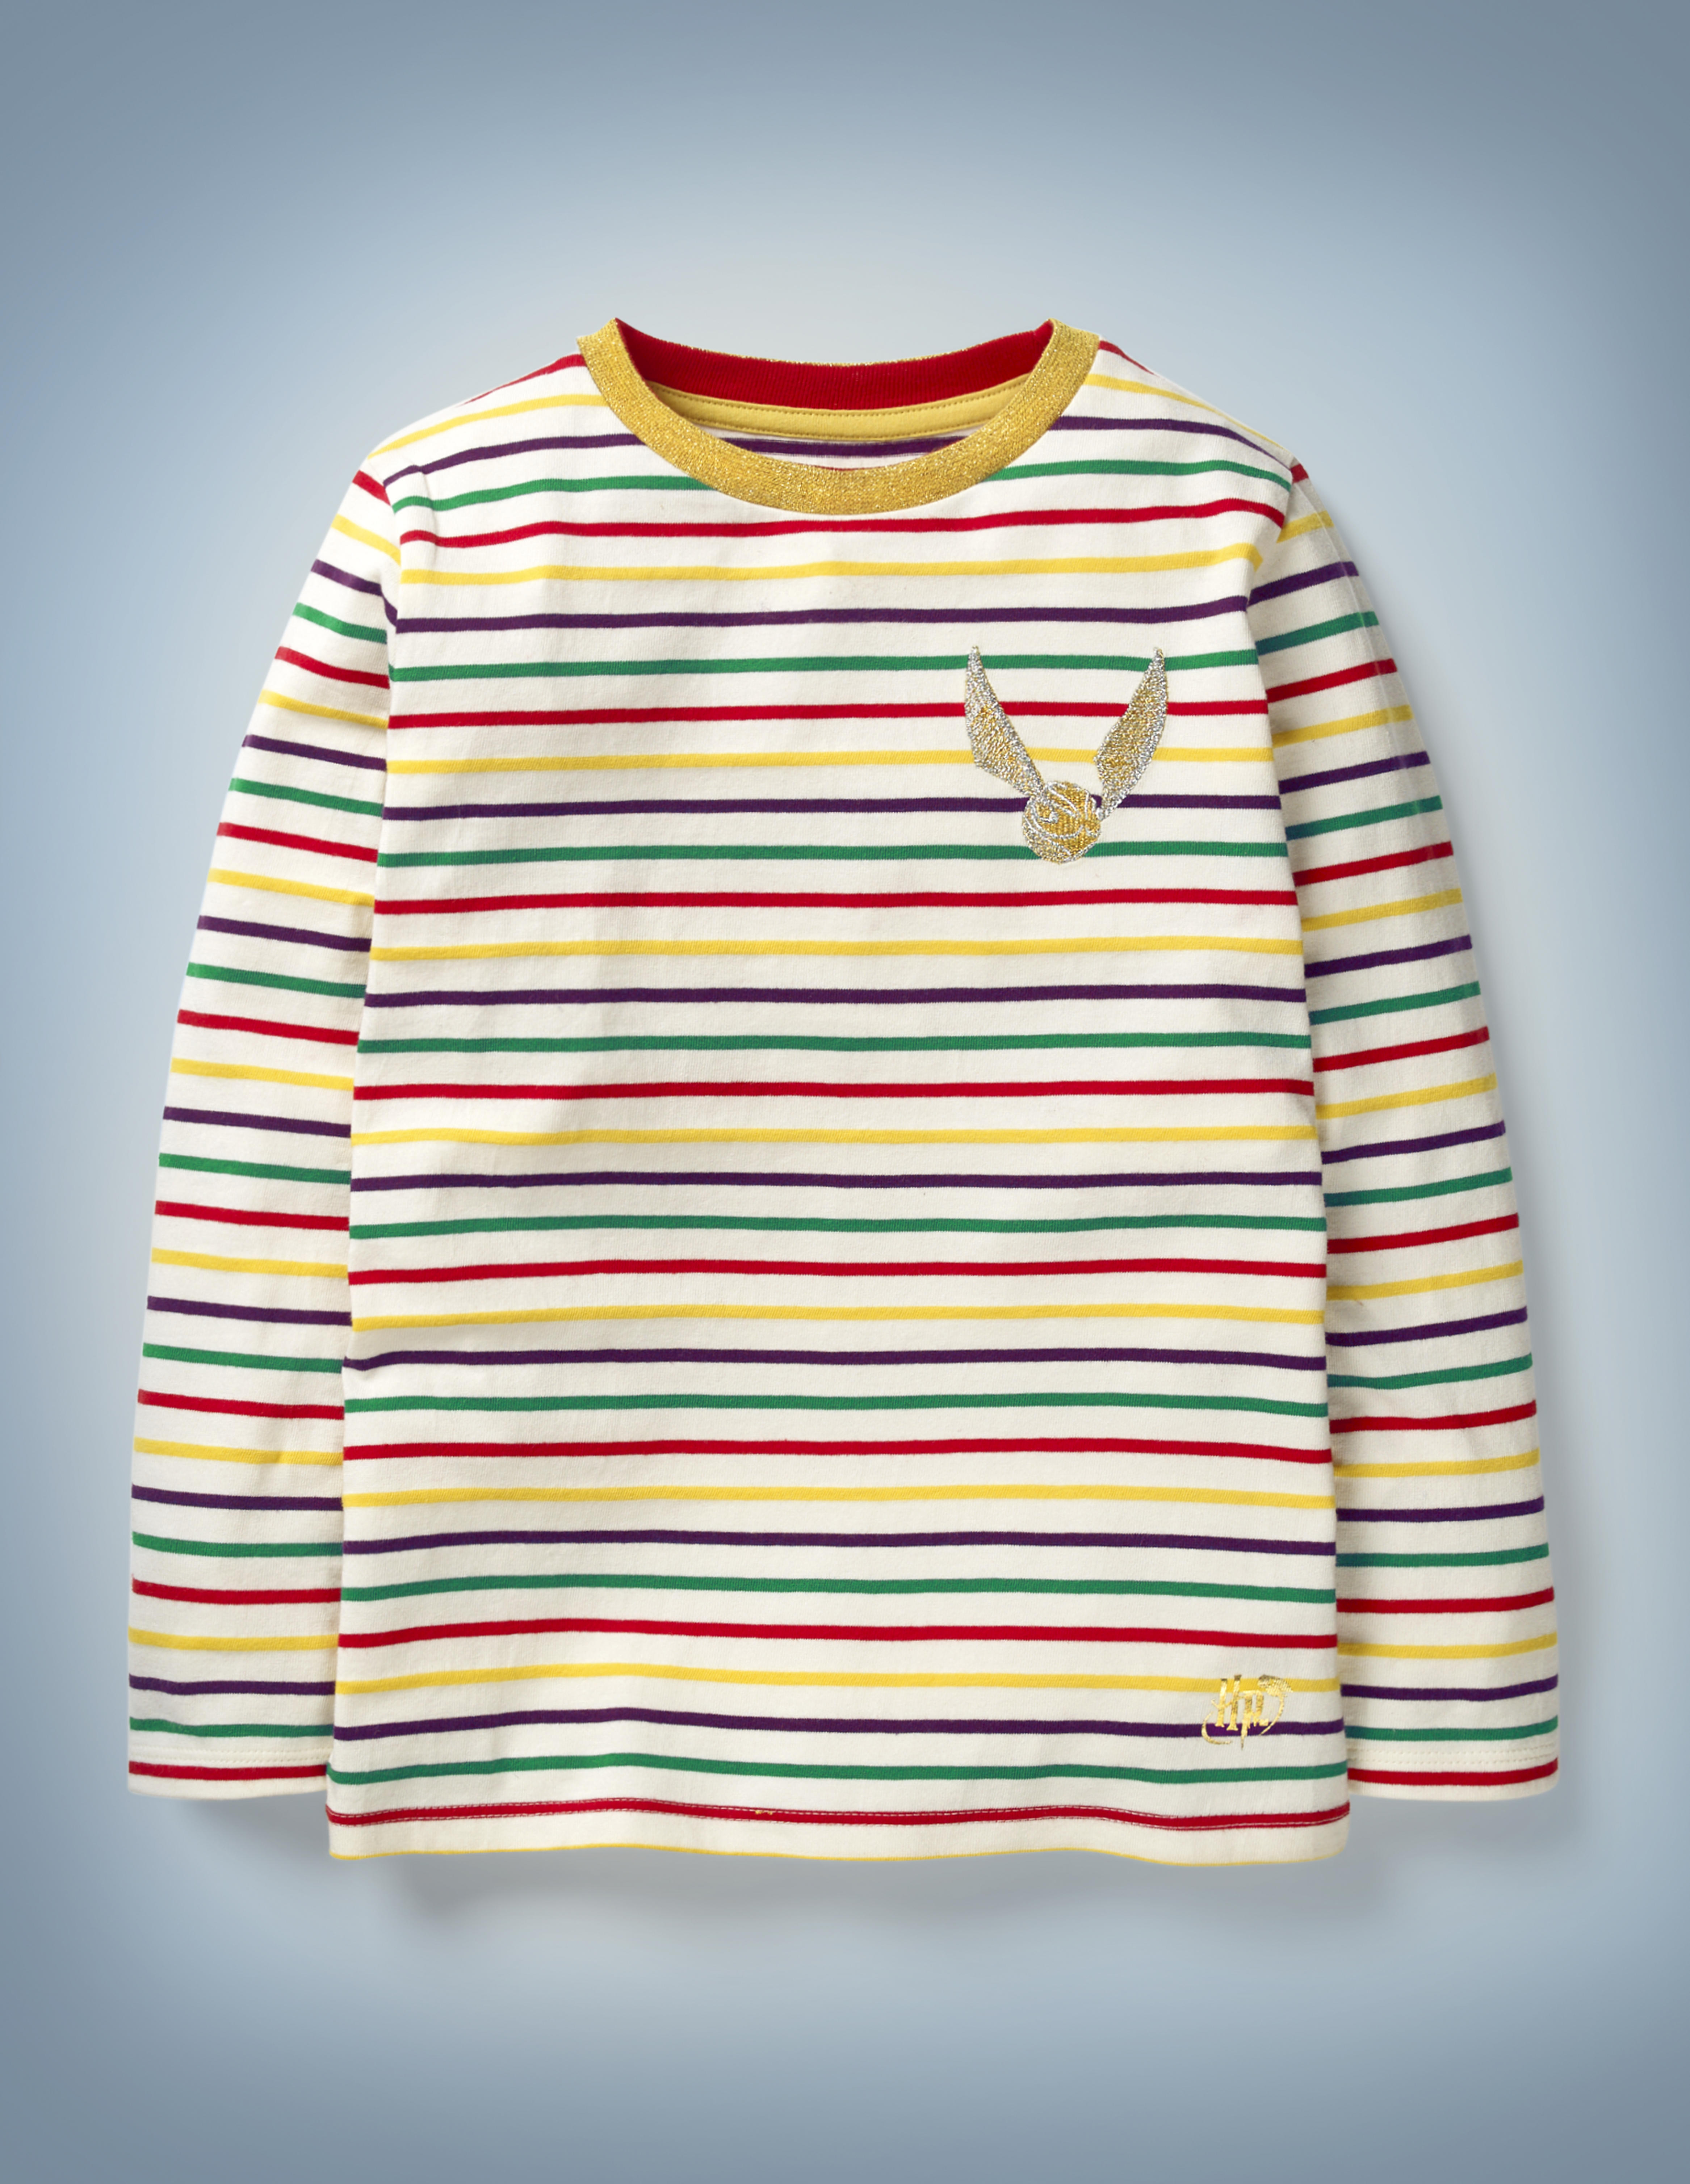 The Mini Boden Golden Snitch Breton, multi-color, features all-over stripes in Hogwarts House colors between white and an image of a Golden Snitch in the front pocket area. It retails at £20.